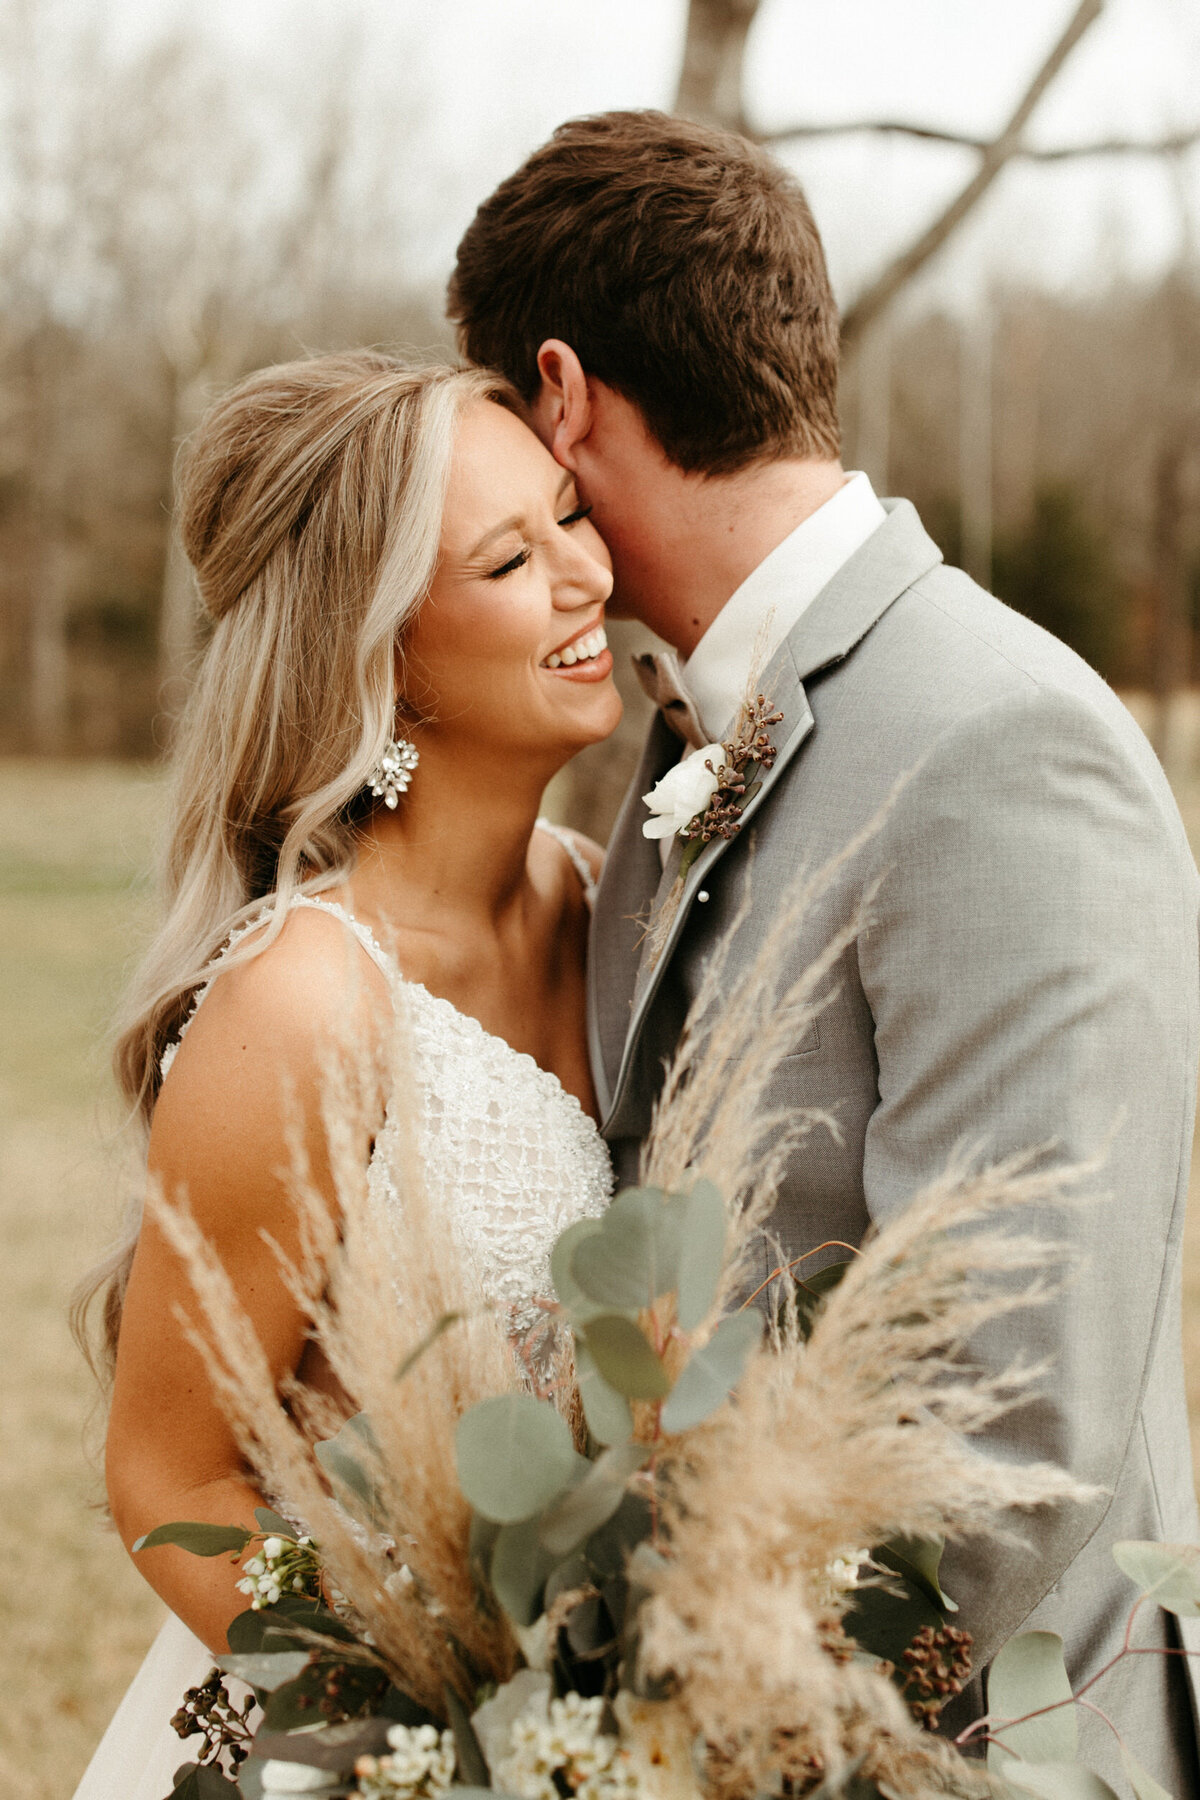 Bride with long loose curly hair laughing as her groom whispers in her ear